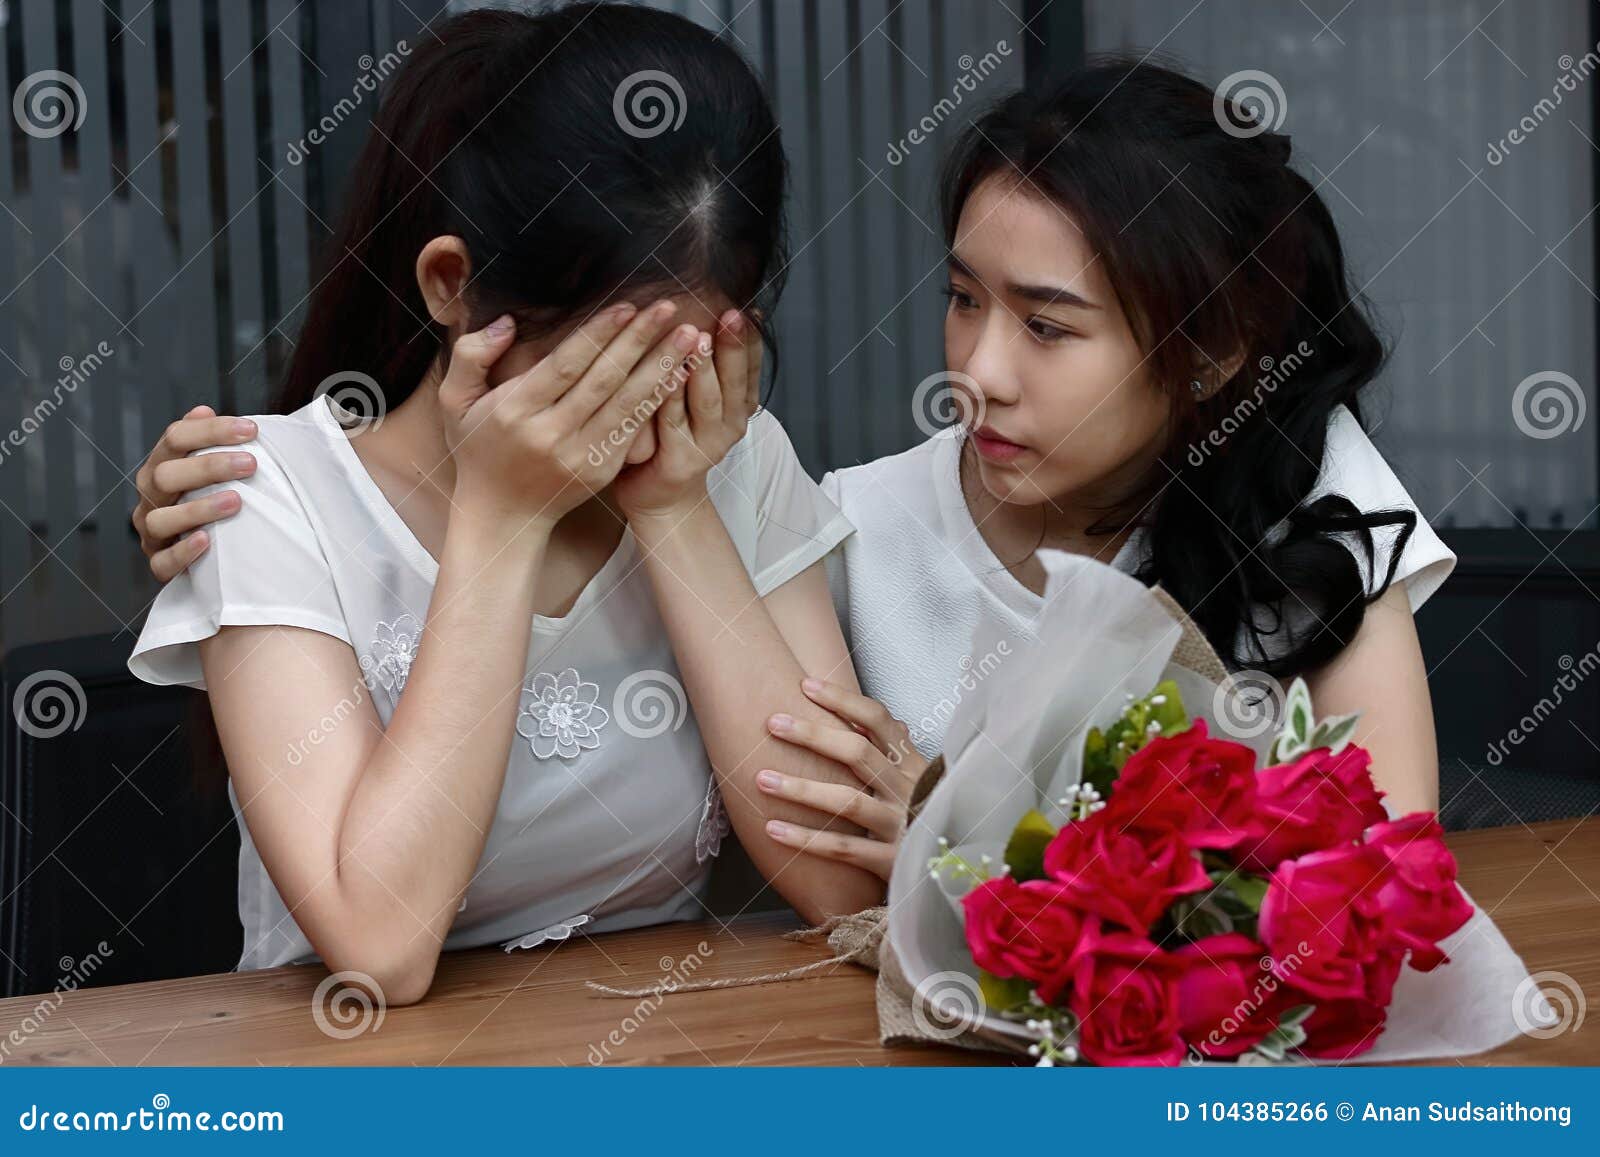 Stressed Young Asian Woman Supporting Depressed Crying Female Friend In